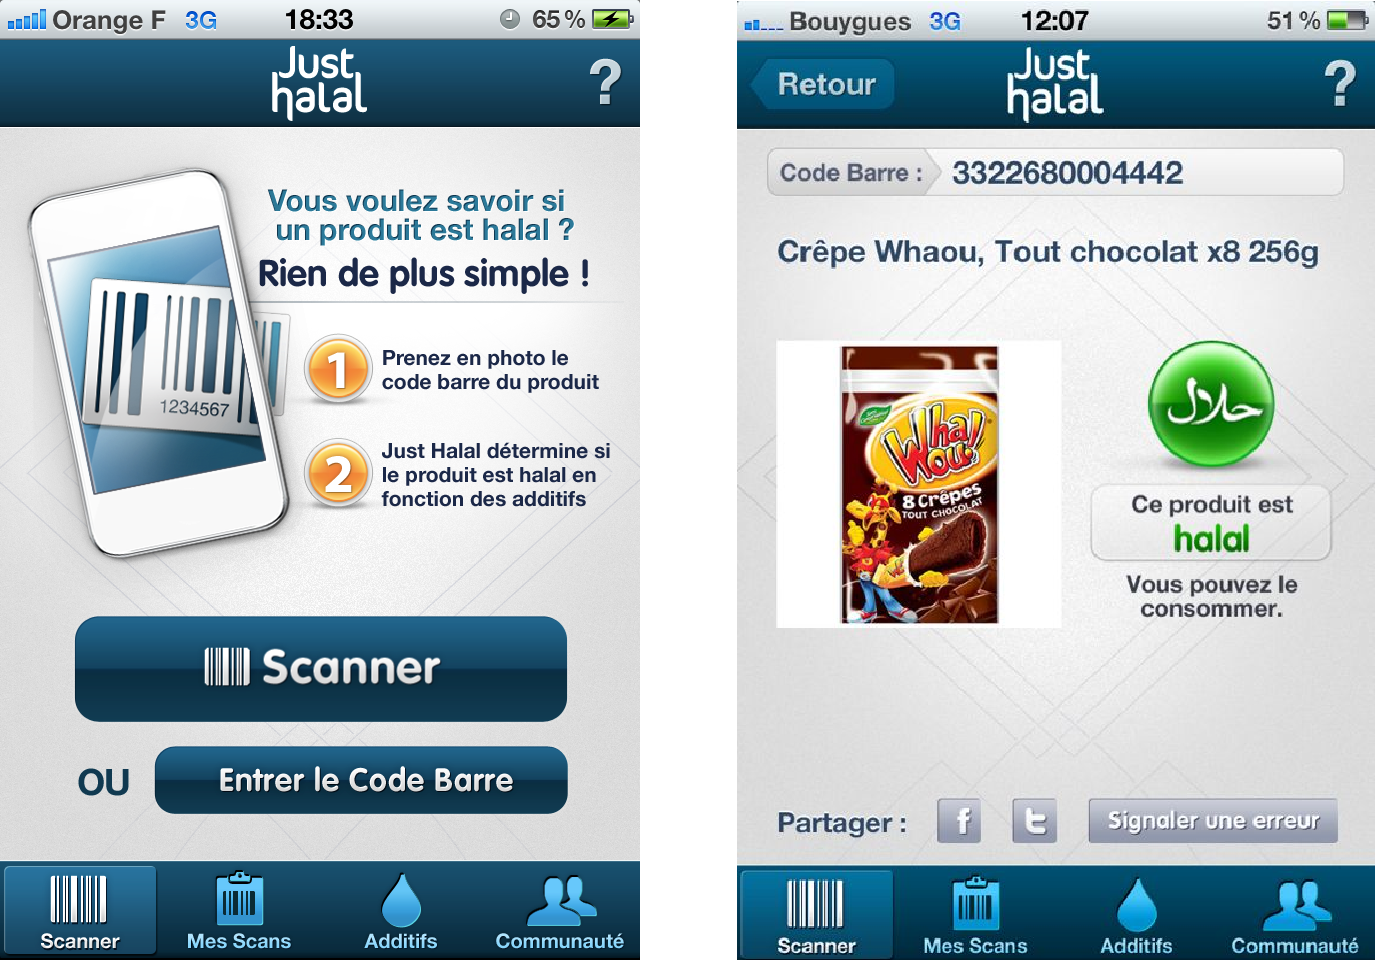 http://www.agro-media.fr/img/just_halal_smartphone.png